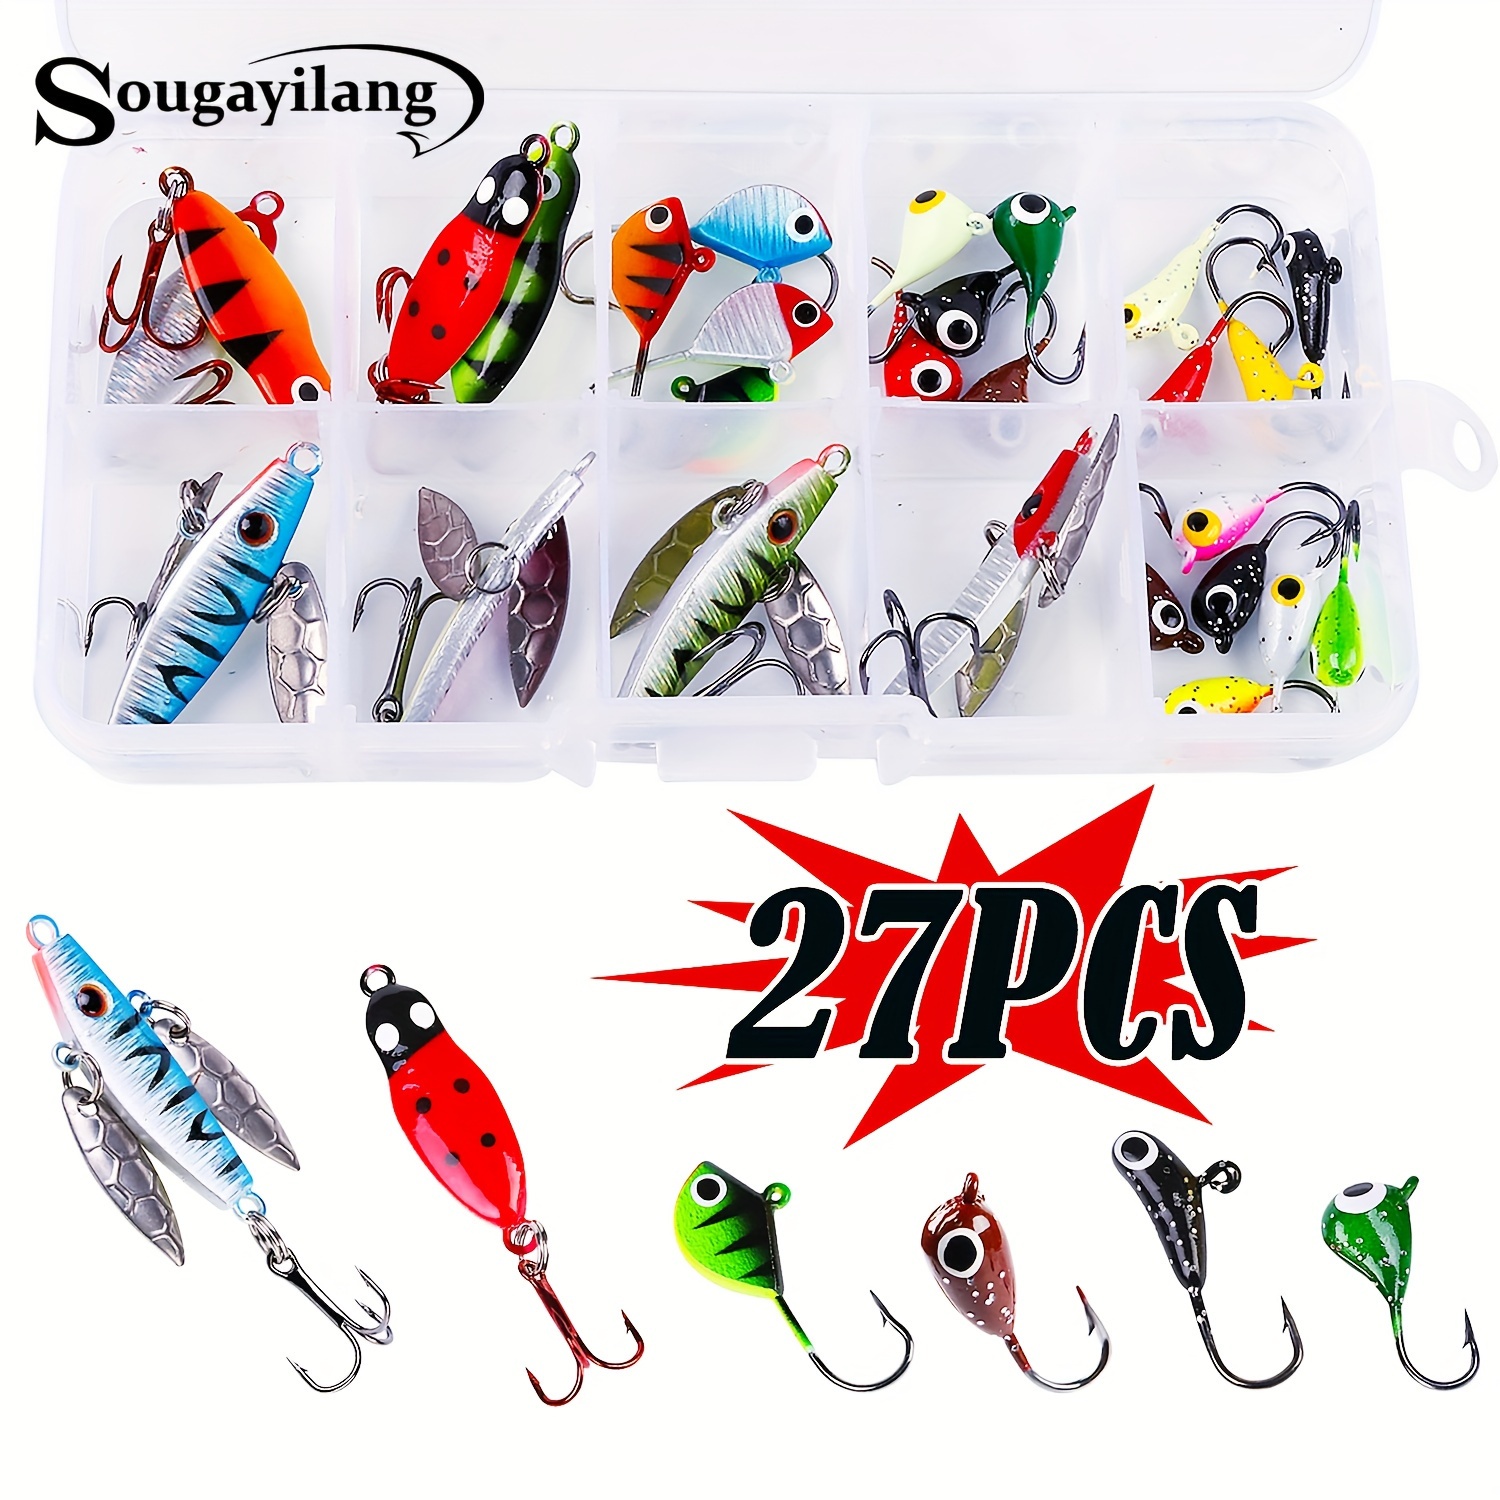 Sougayilang 27pcs Ice Fishing Lures Set, Fishing Hooks Tackle Kit For  Saltwater And Freshwater Bass Trout Salmon Pike Walleye Winter Fishing  Tackle Se